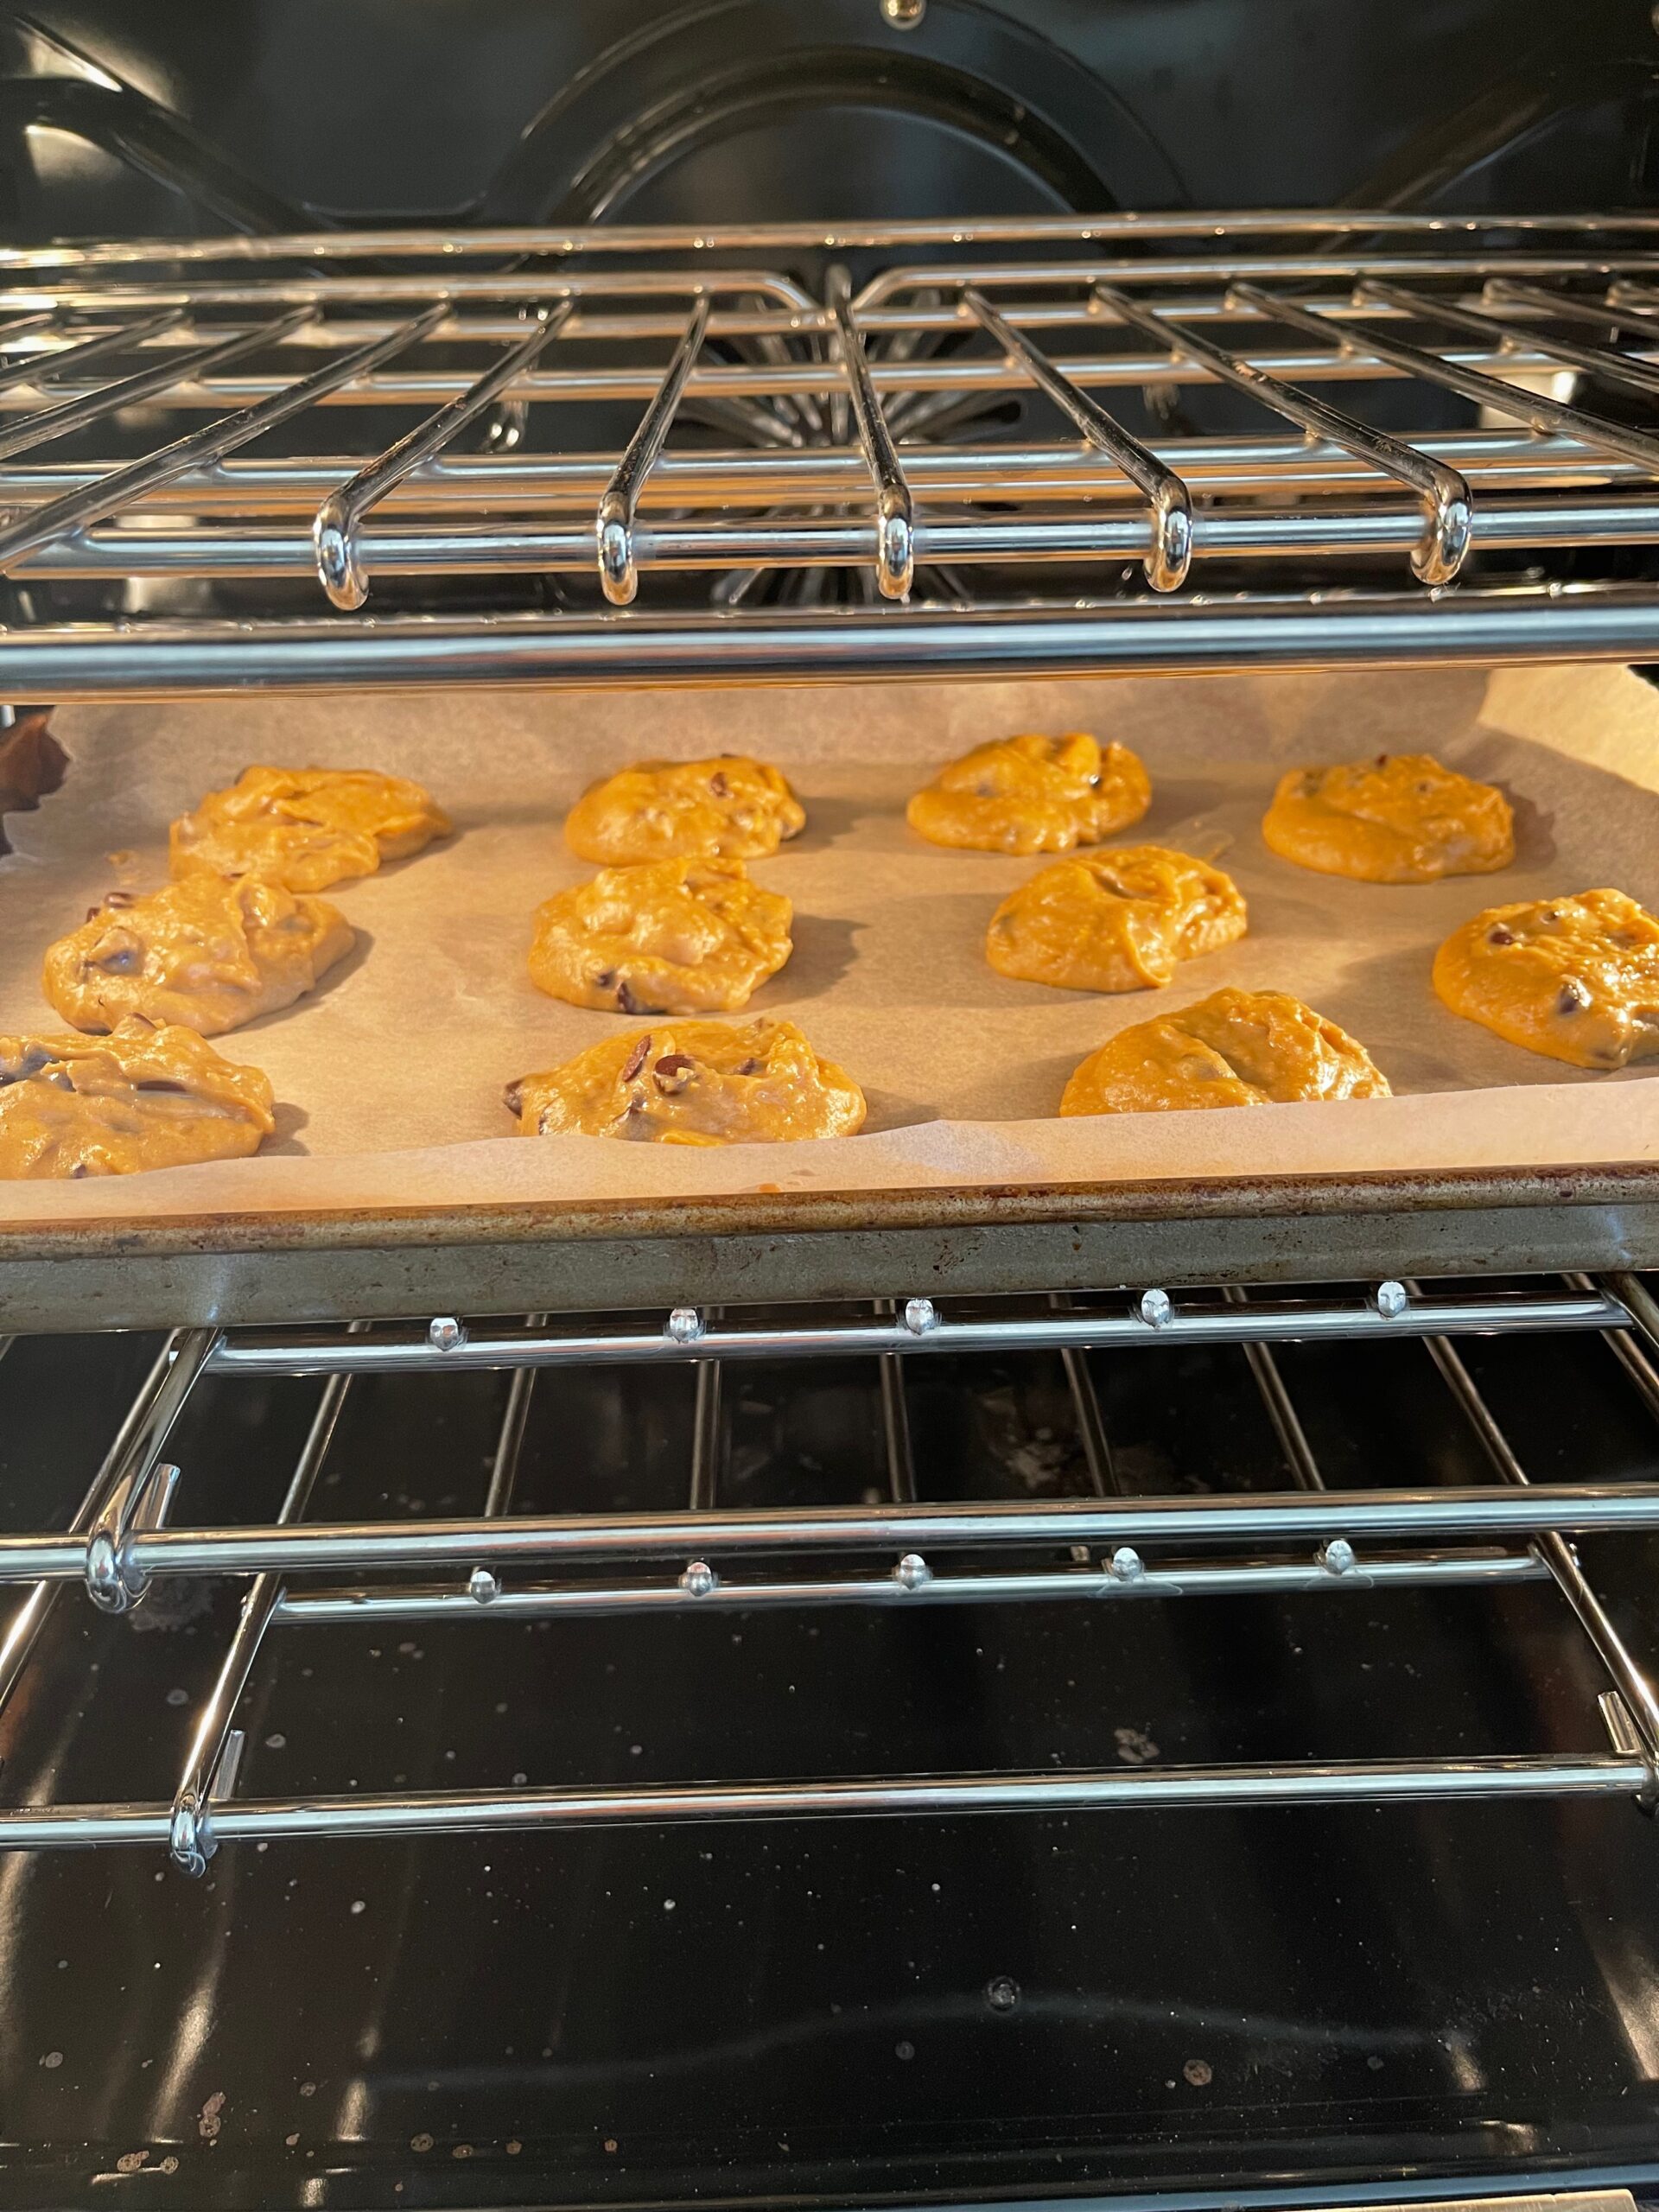 Chickpea Peanut Butter Chocolate Chip Cookies being baked in an oven on a cookie sheet.